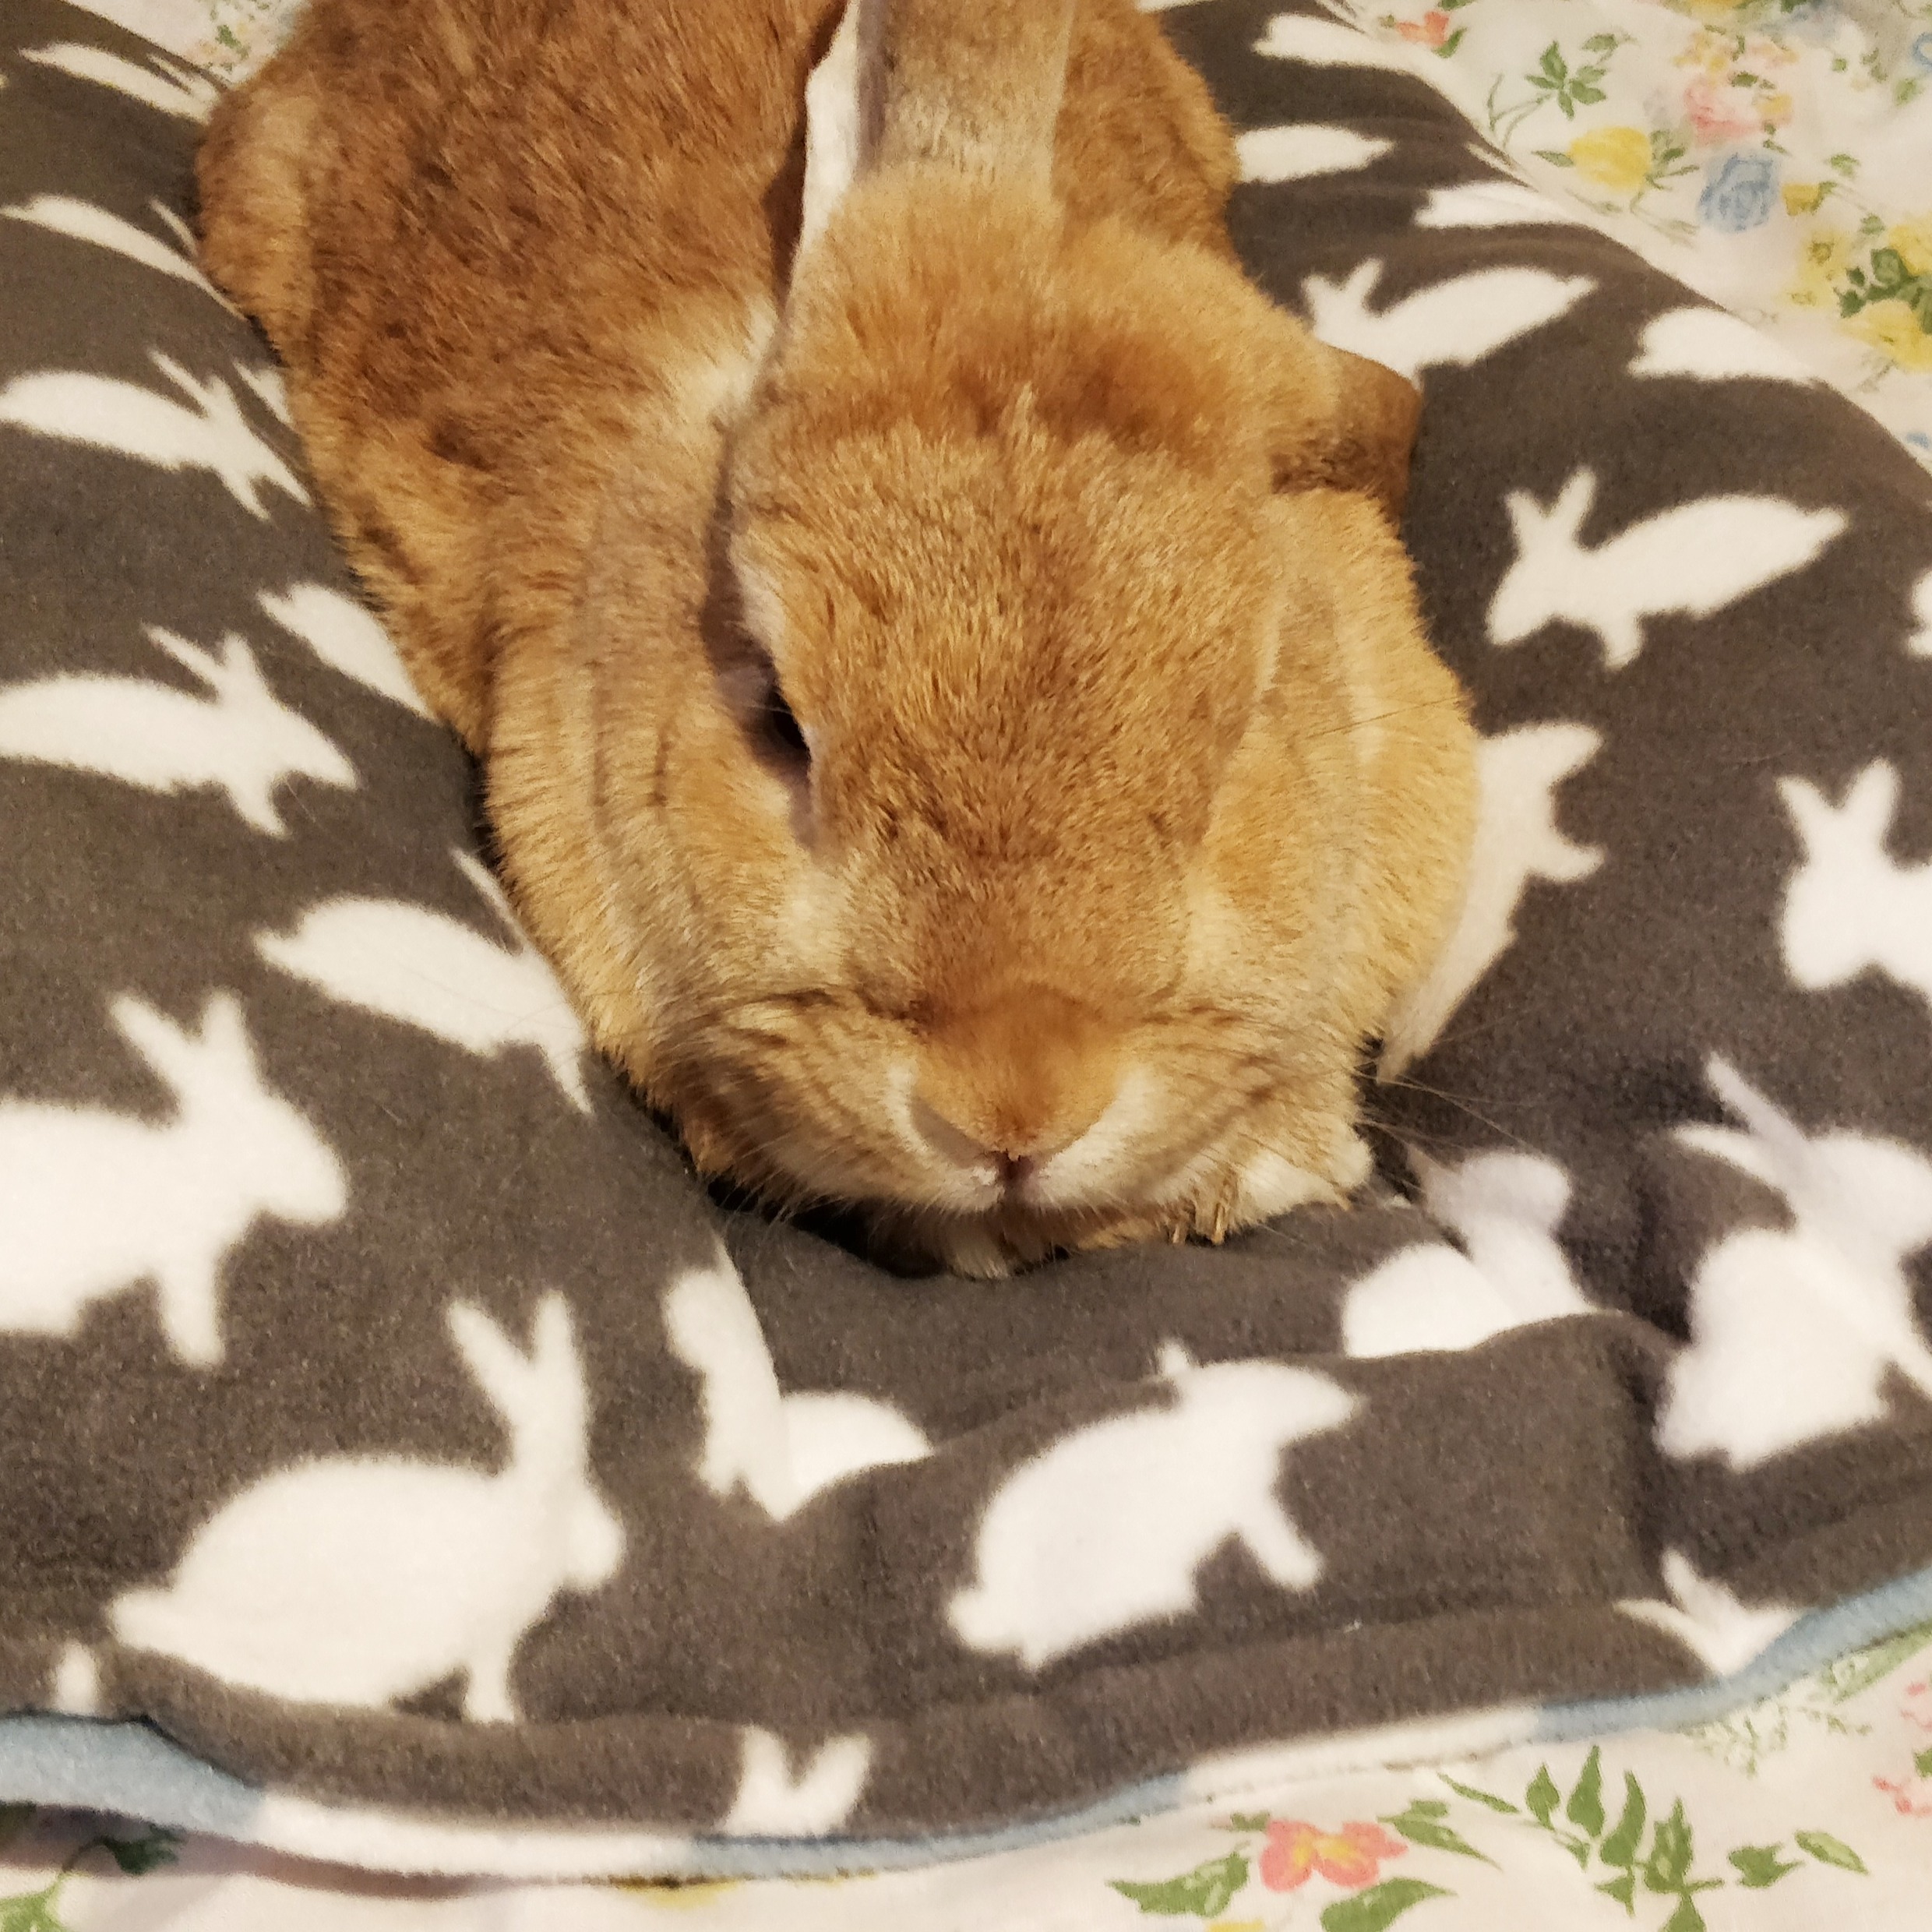 Relaxed Bunny